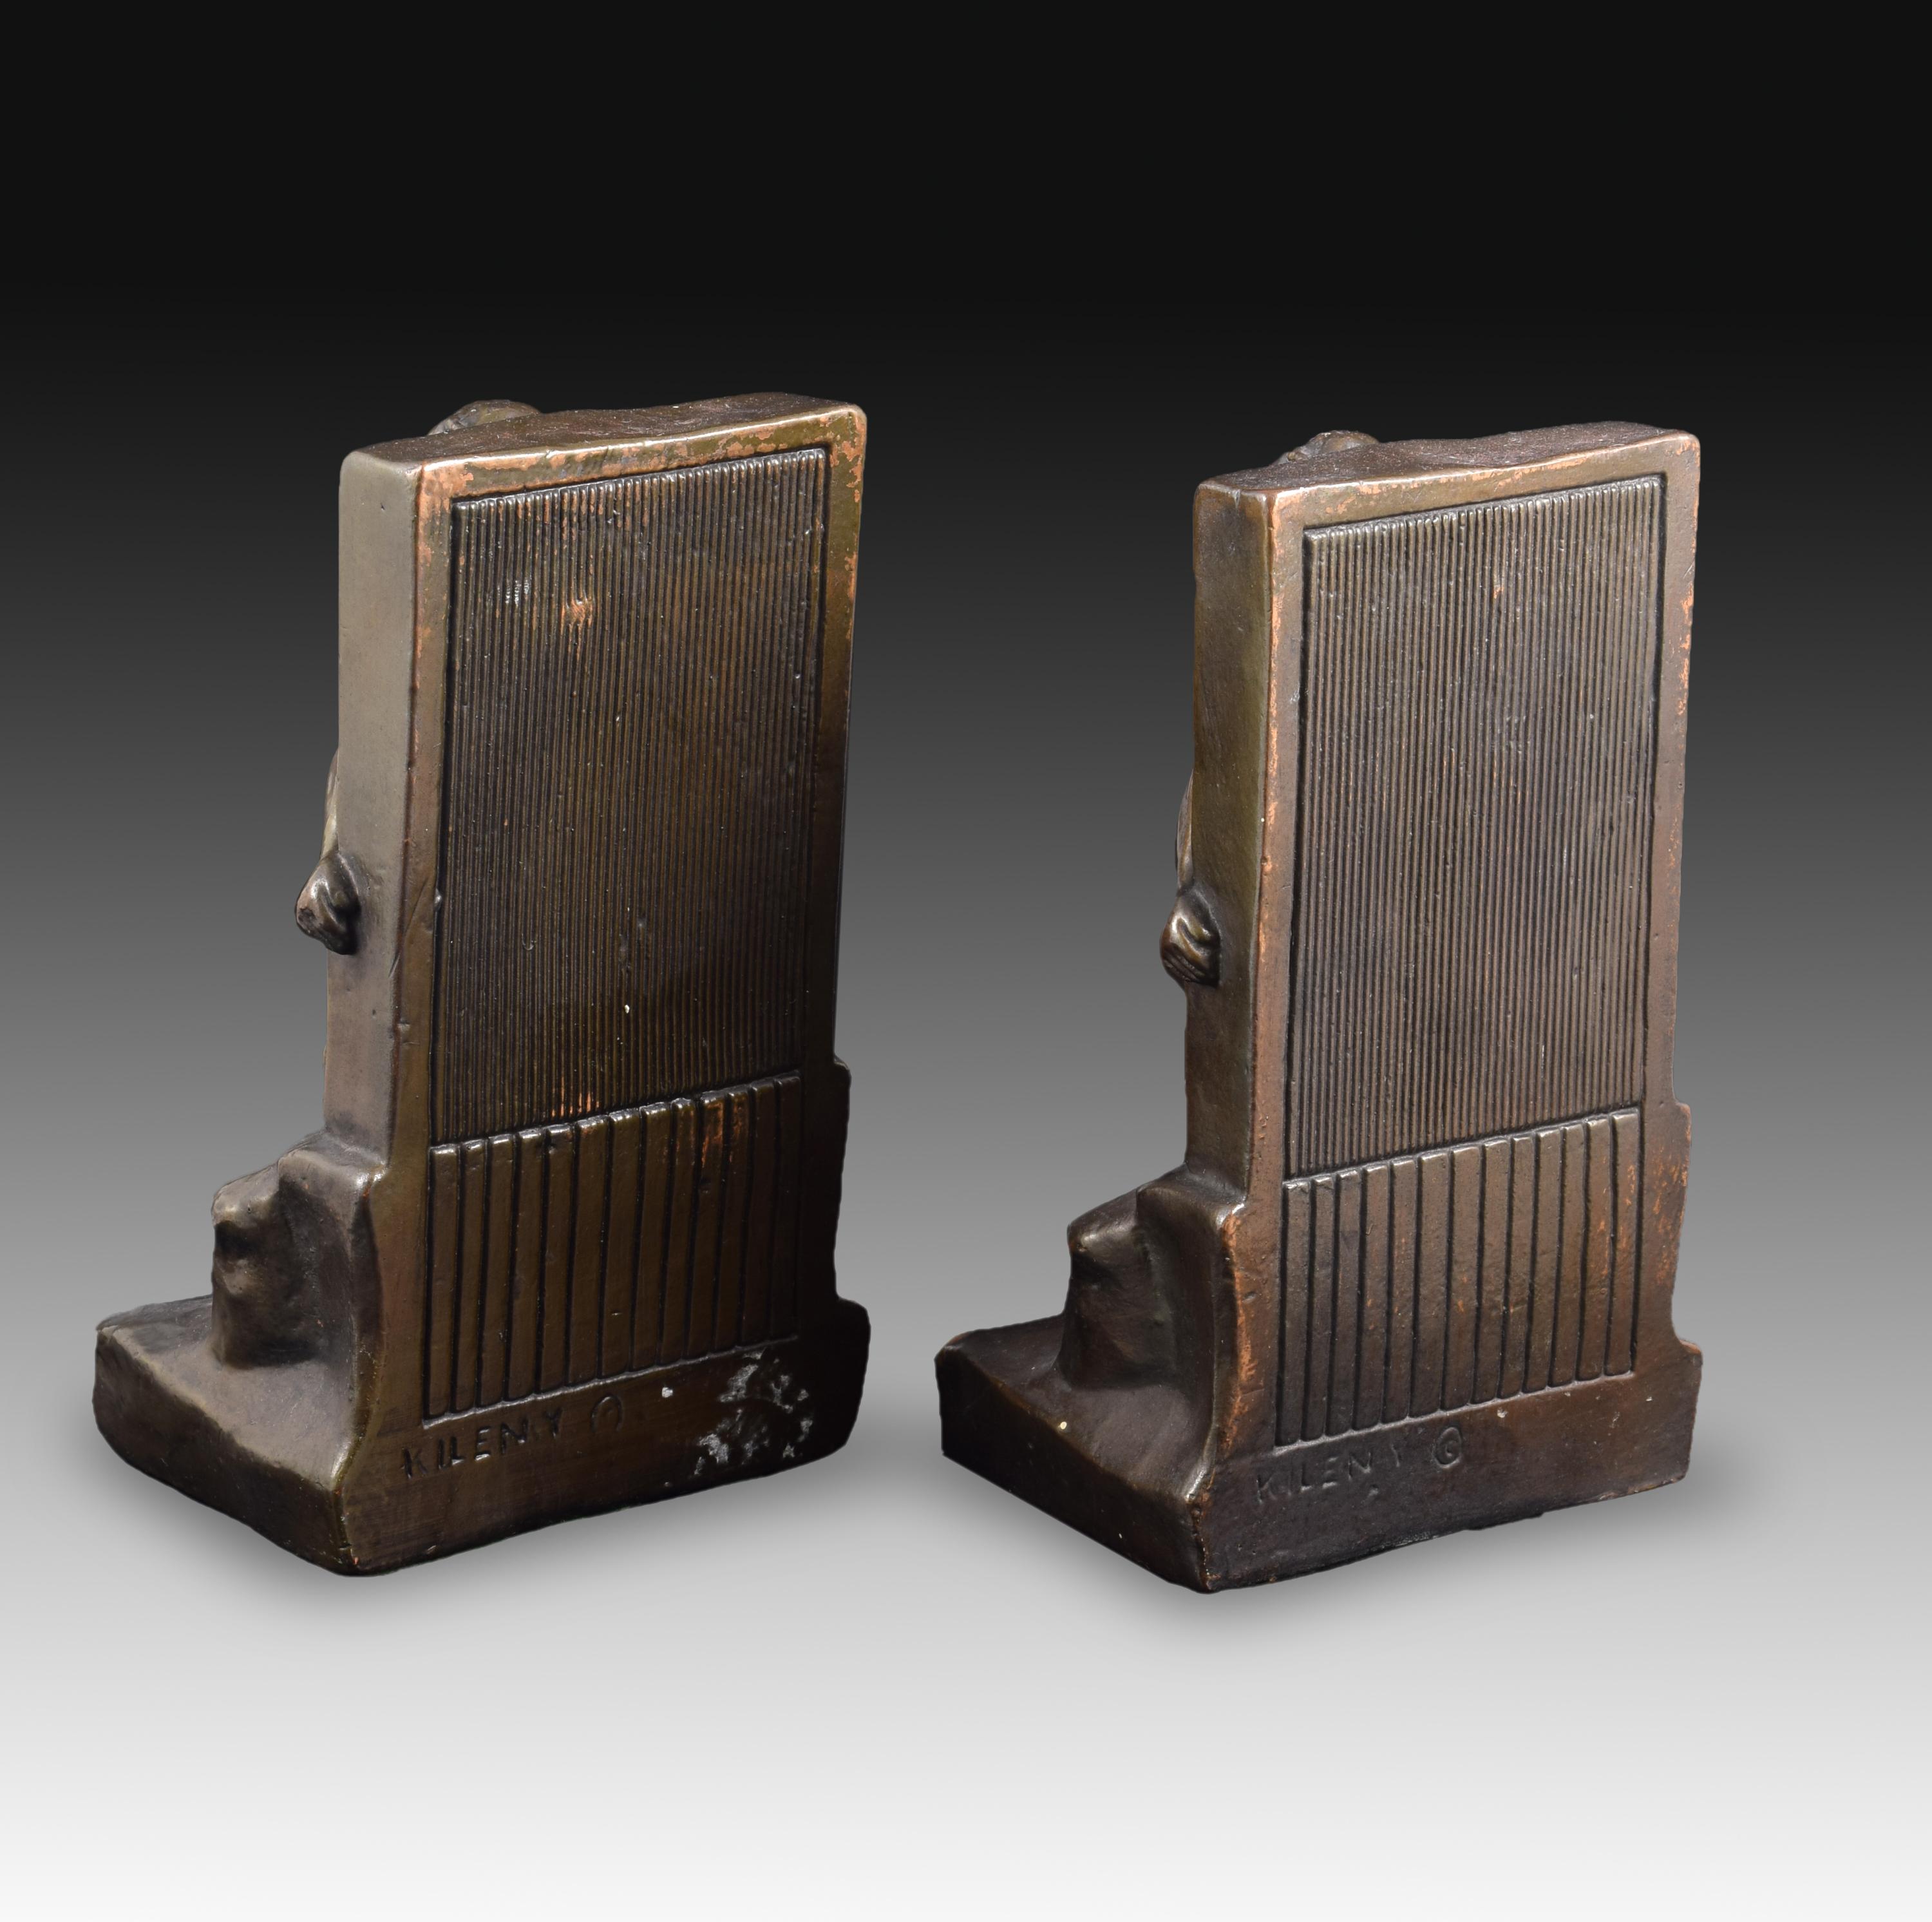 Pair of bookends. Bronze, circa 1920s.
Pair of bronze bookends that have an inscription on the front (The Builder) and another on the back (Kileny). Julio Kileny (United States / Hungary, 1885-1959) was an artist well known for his designs for